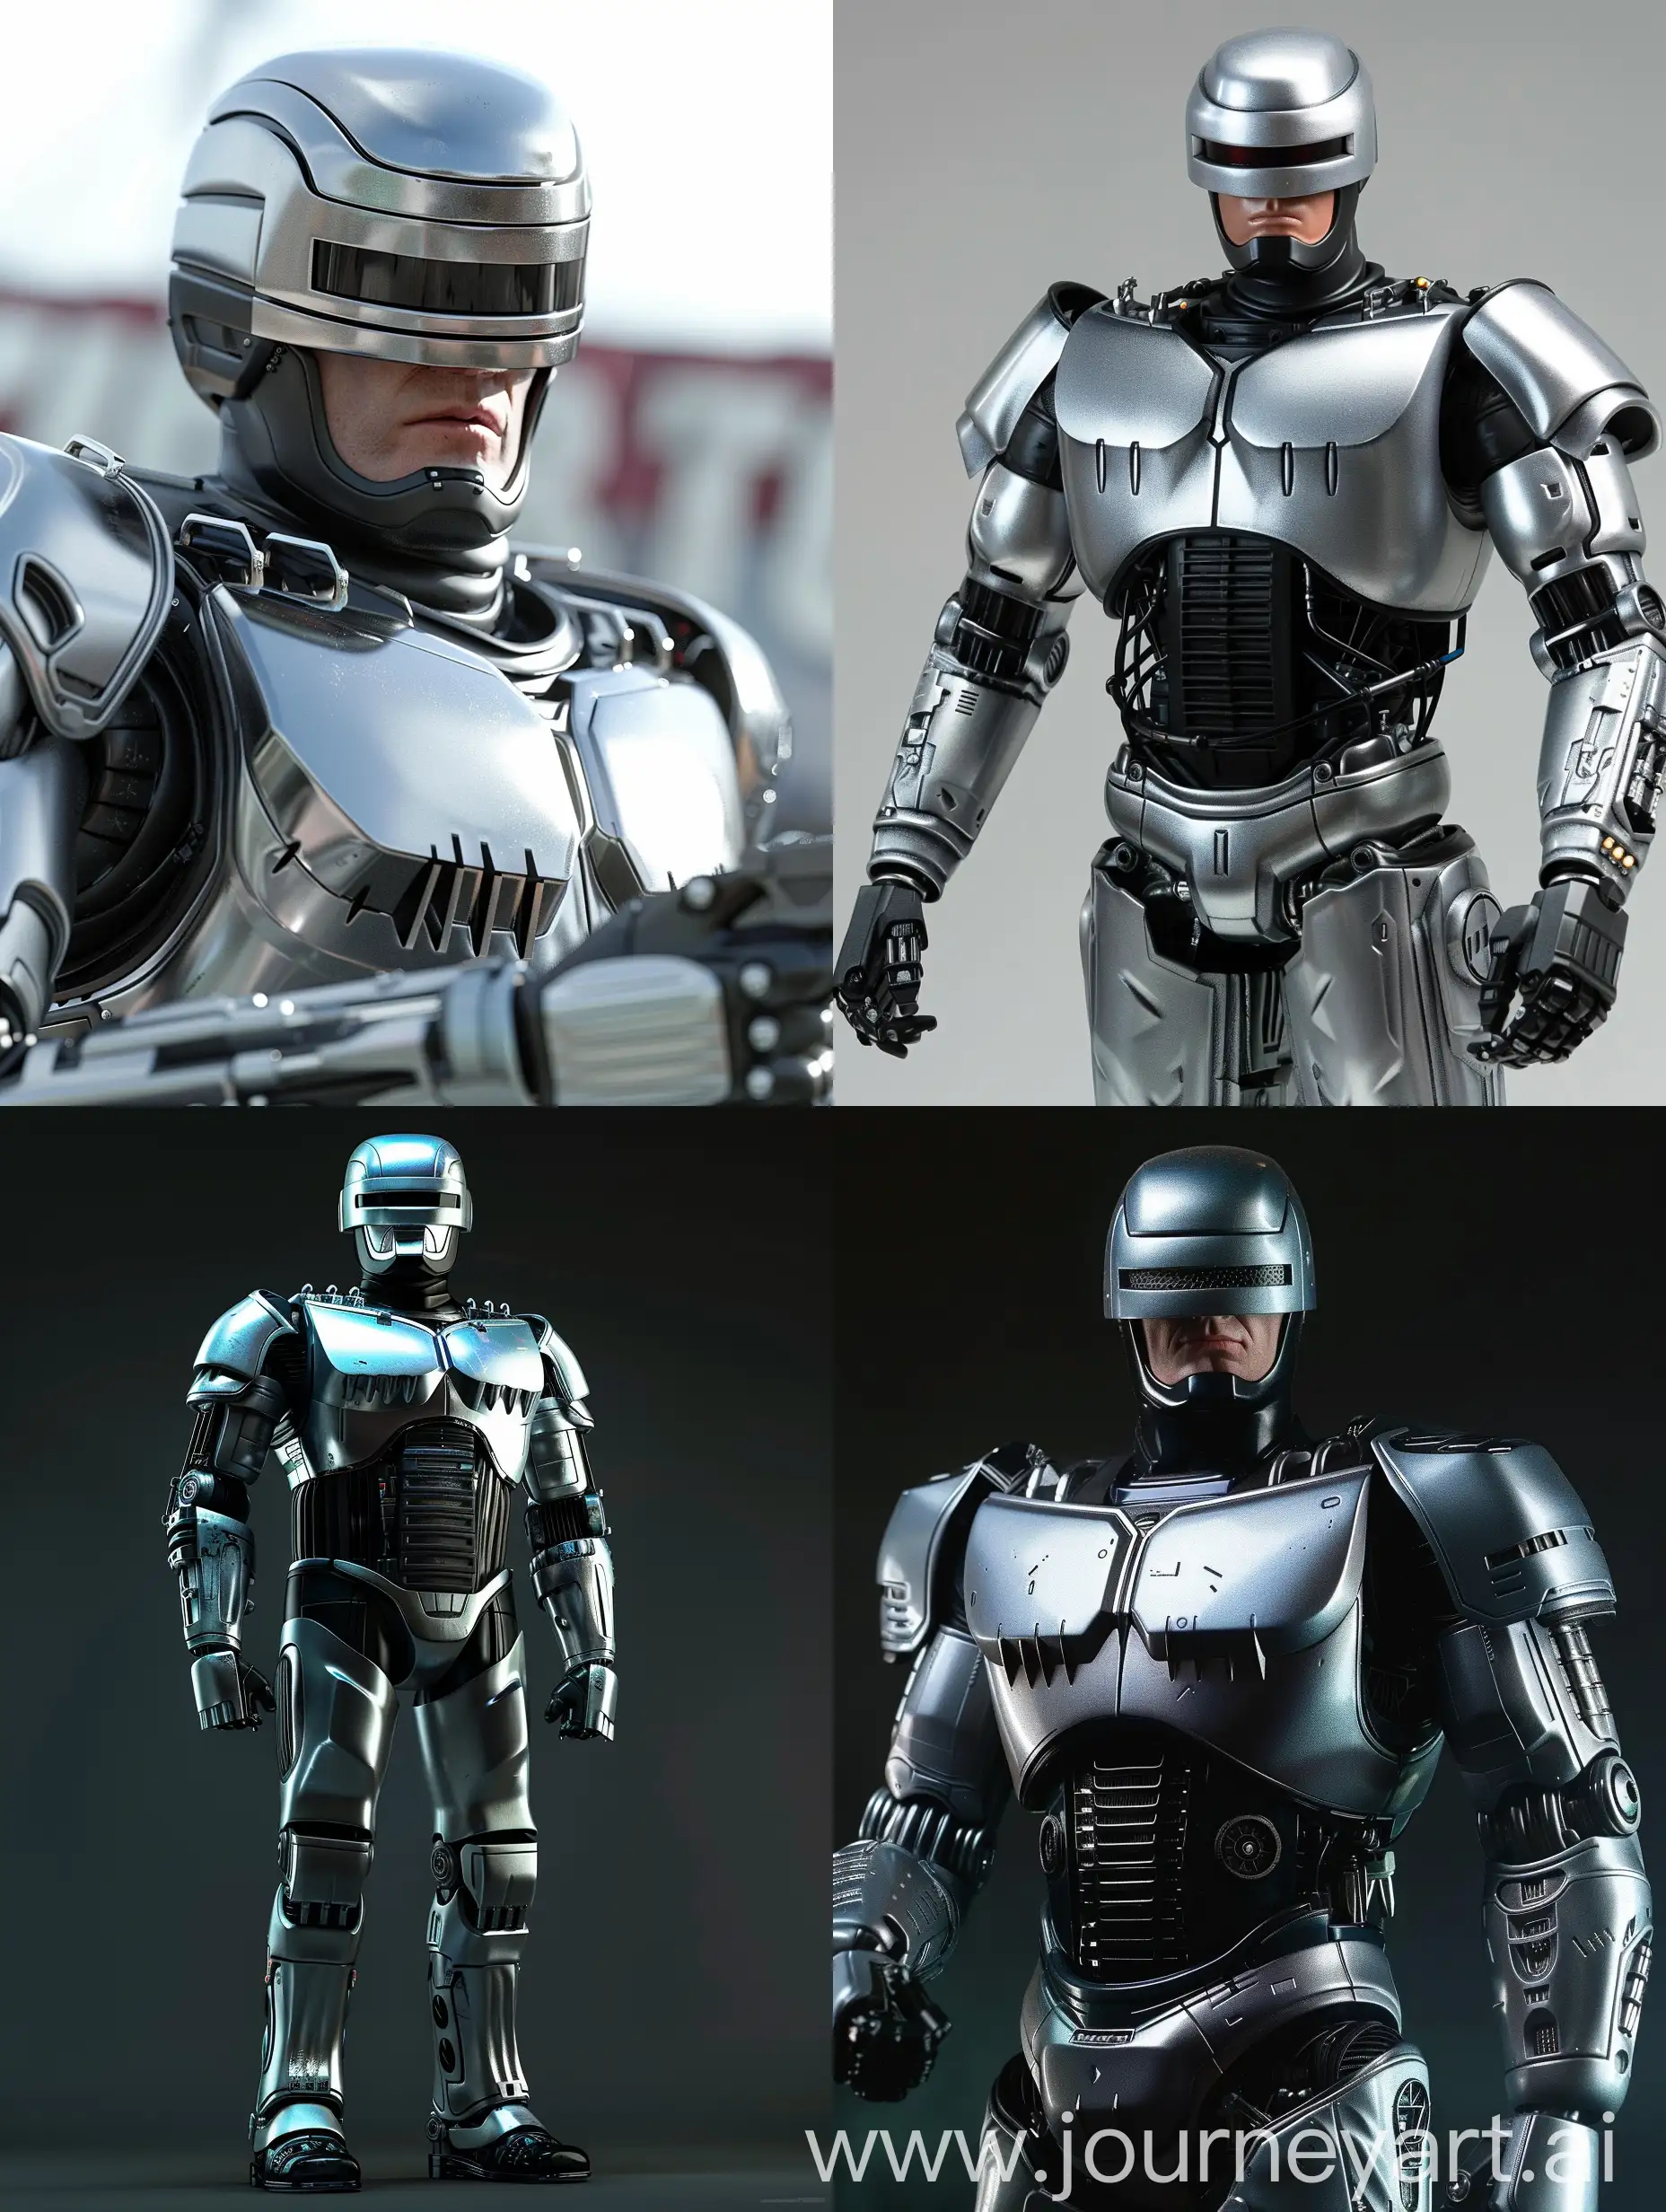 RoboCop, super realistic, highly detailed 